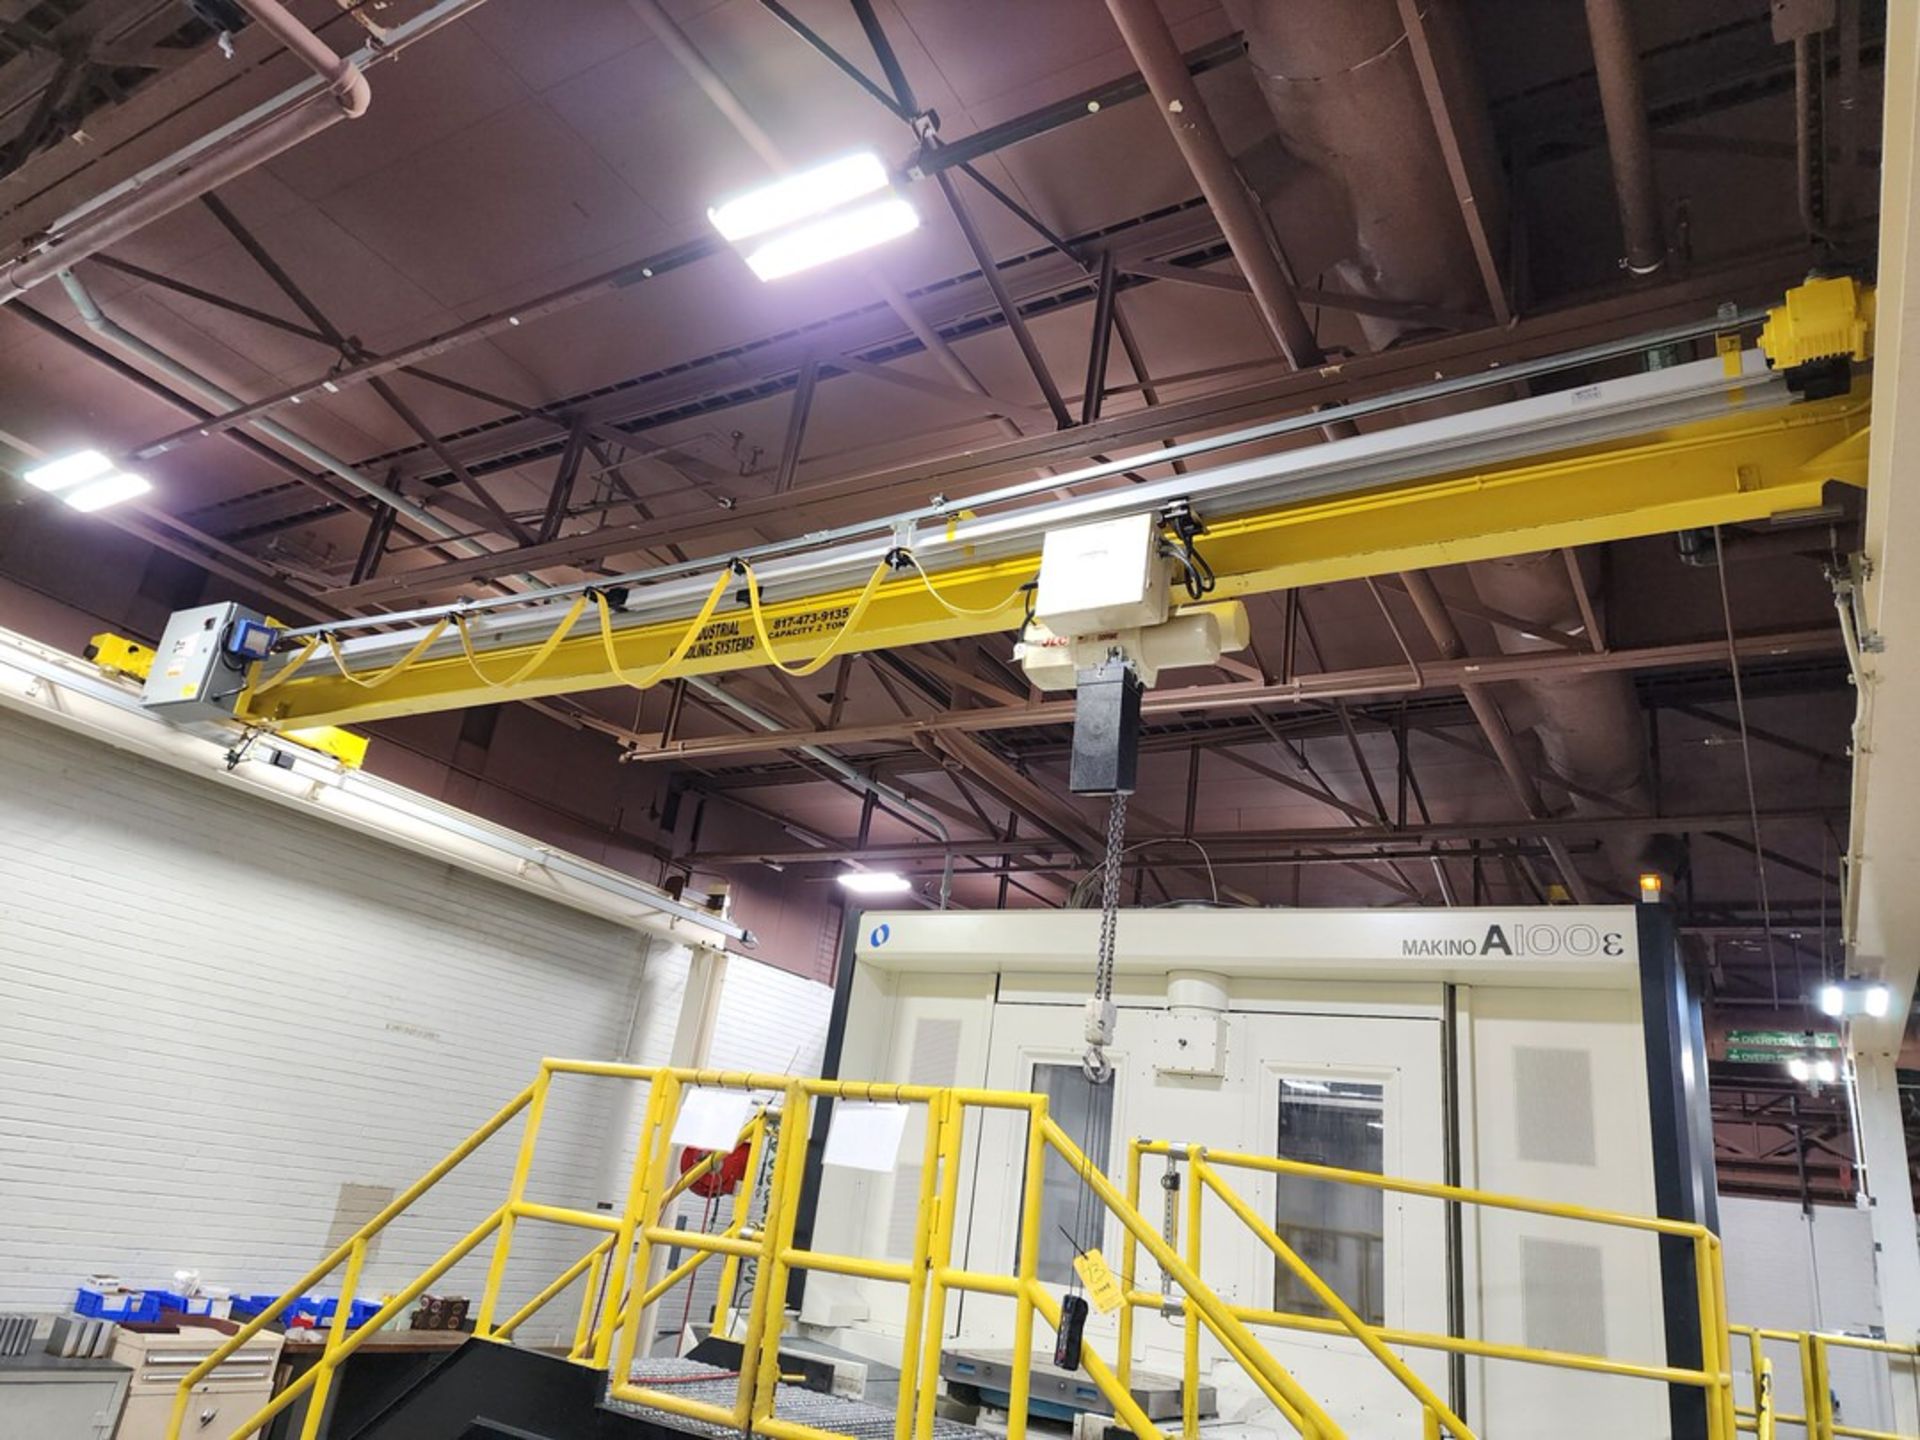 Industrial Handling Systems 4-Post 2 Ton Overhead Crane 28' x 24-1/2' x 11-1/2'H (Location: Machine - Image 3 of 14